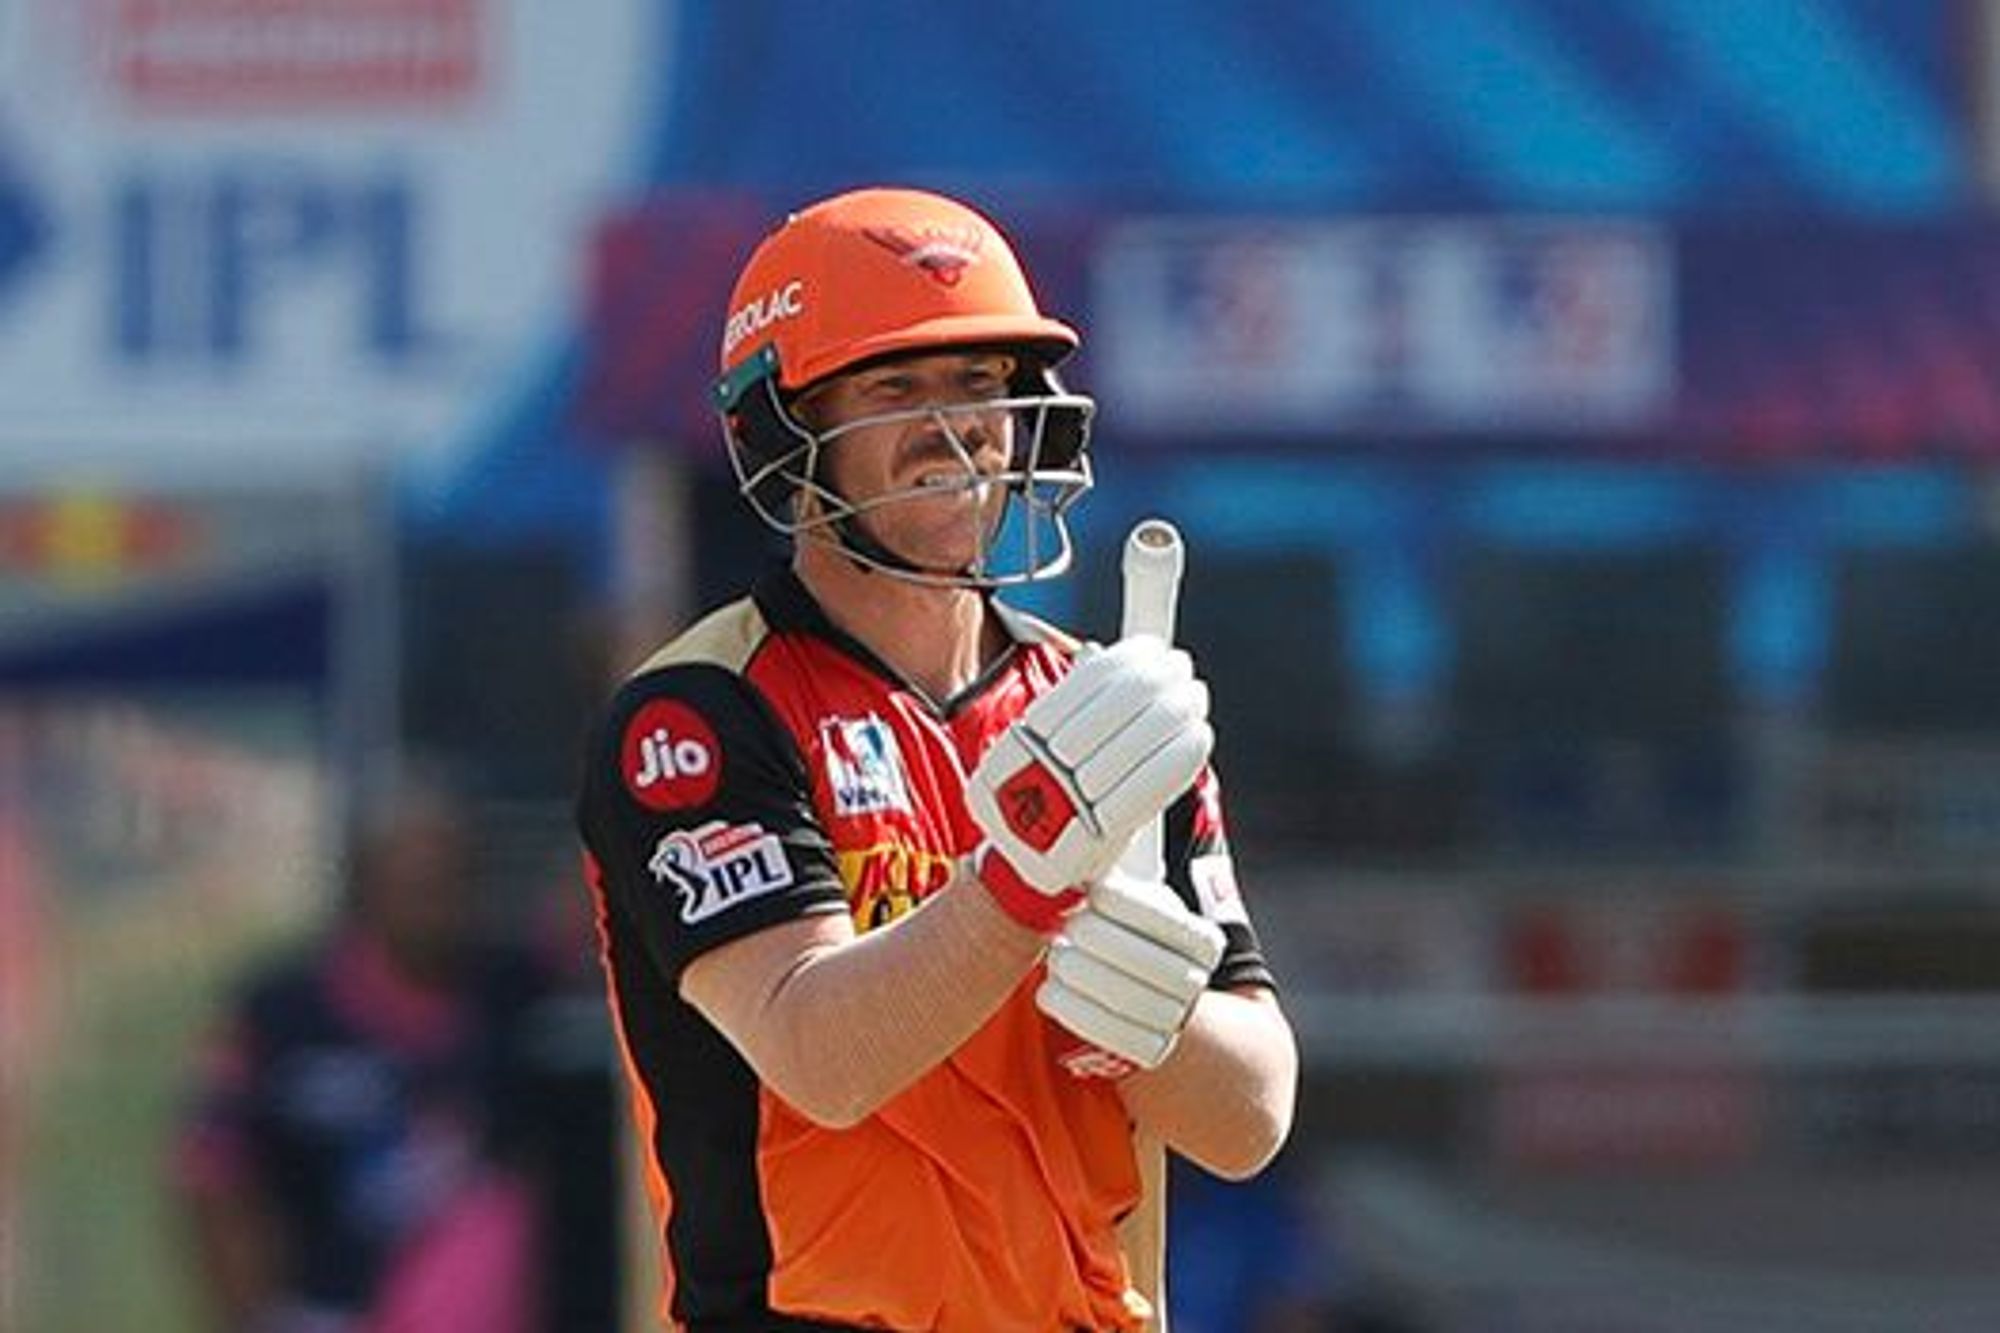 Dropping David Warner in IPL 2021 was 'not a cricket decision', says SRH assistant coach Brad Haddin